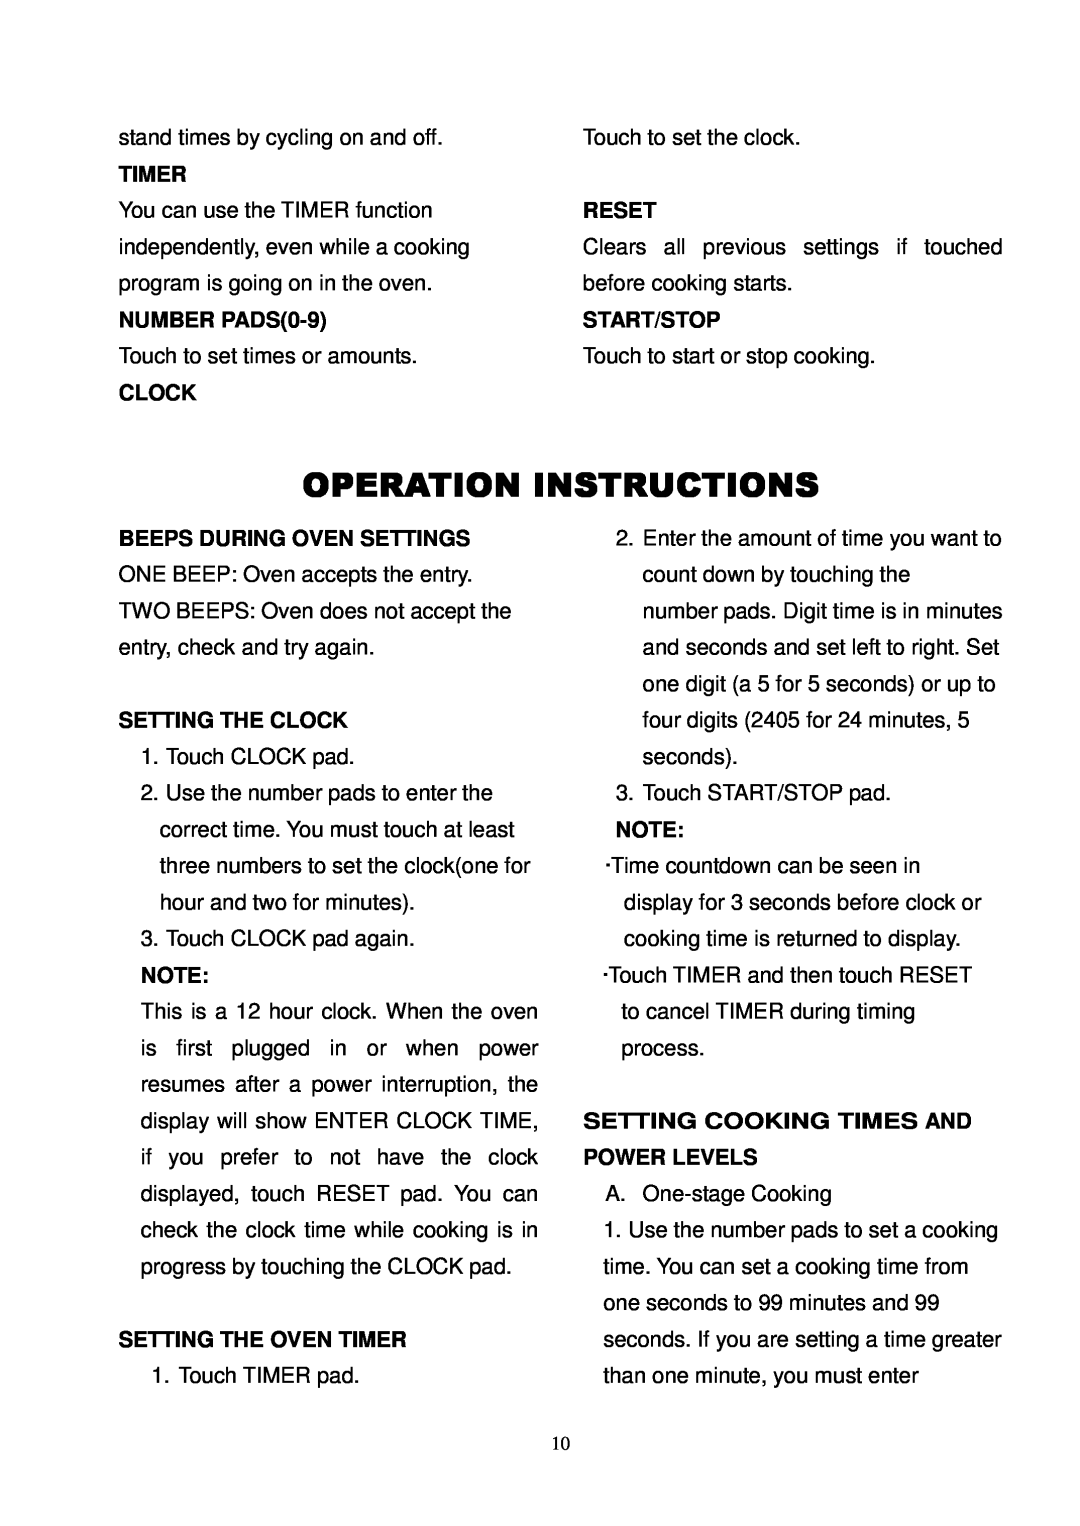 Magic Chef MCD775ST Operation Instructions, Timer, NUMBER PADS0-9, Clock, Reset, Start/Stop, Beeps During Oven Settings 